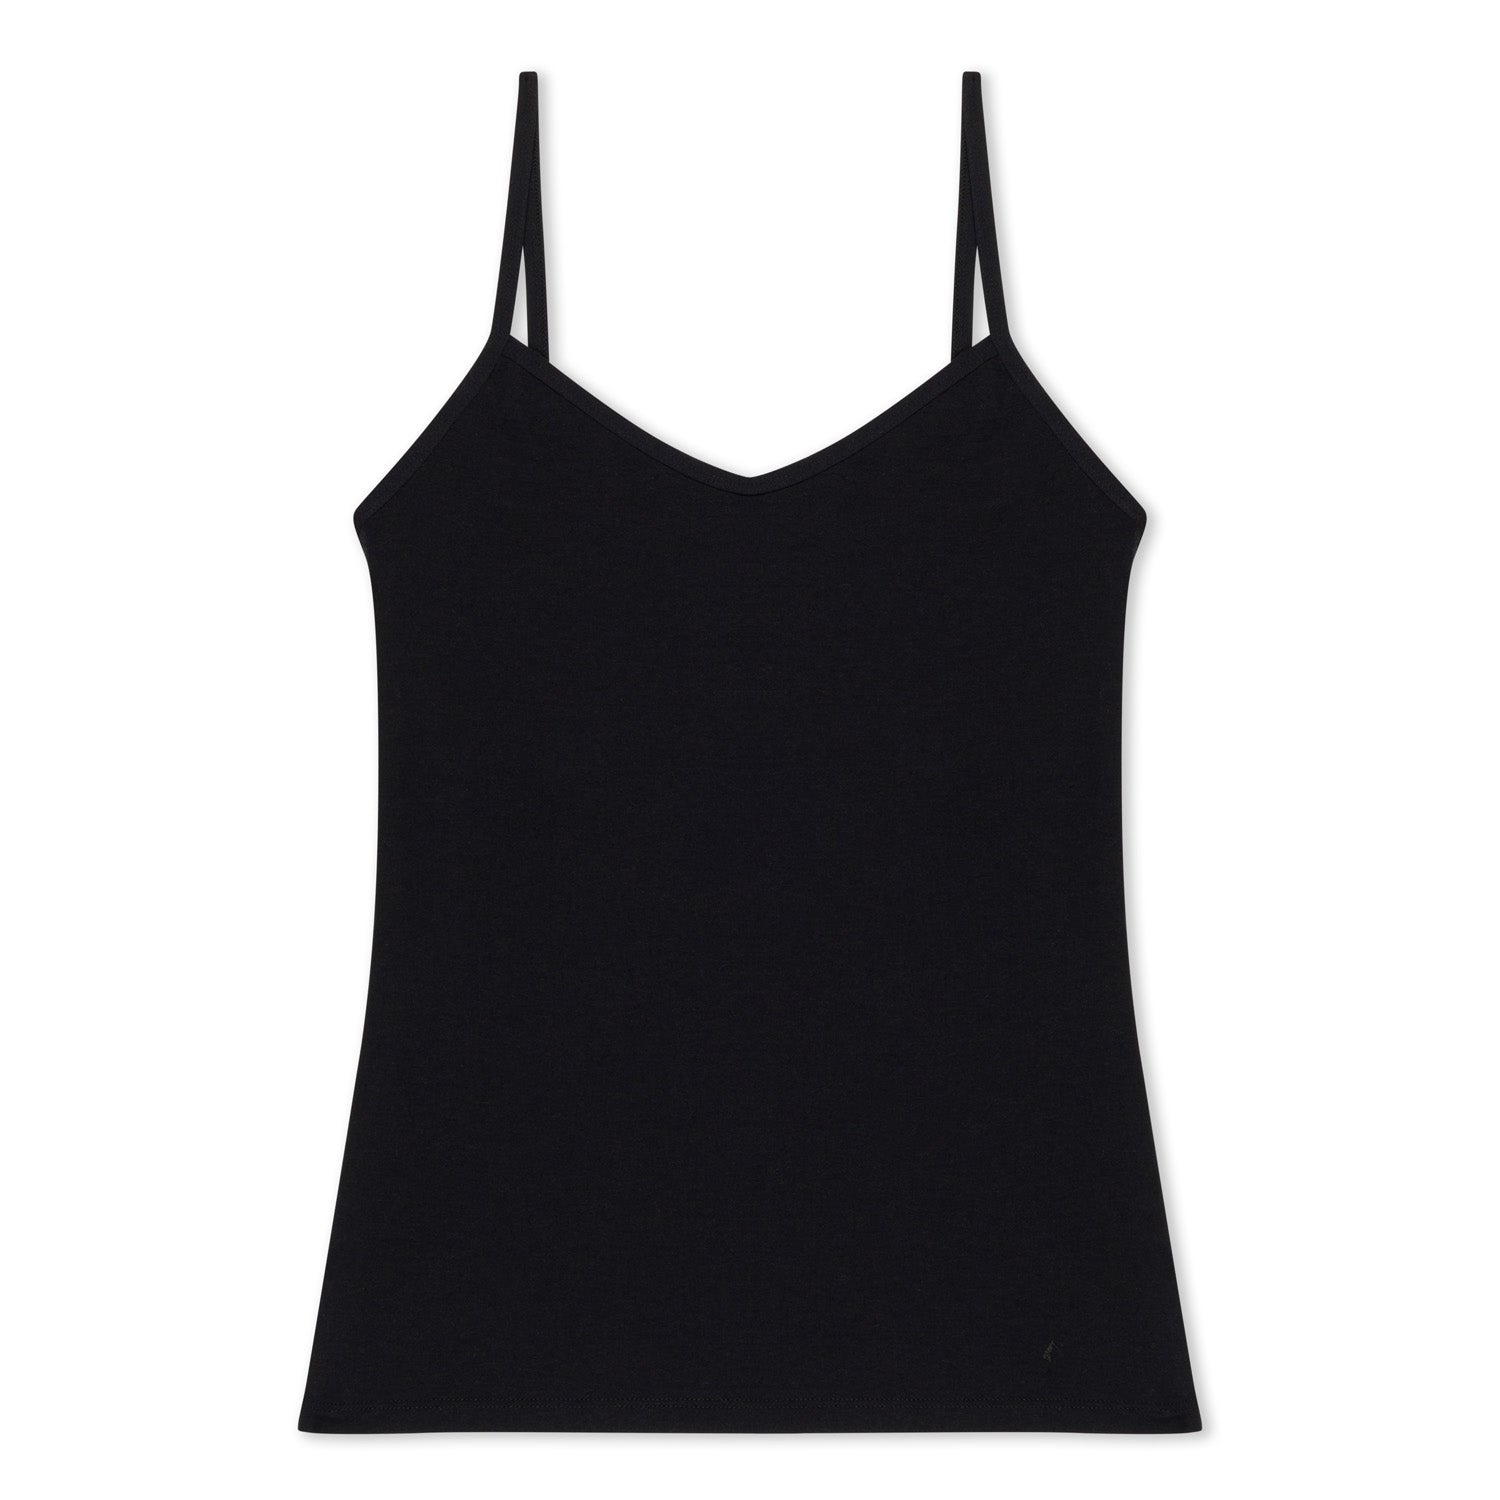 Is it possible to make a woven top with a shelf bra built in? : r